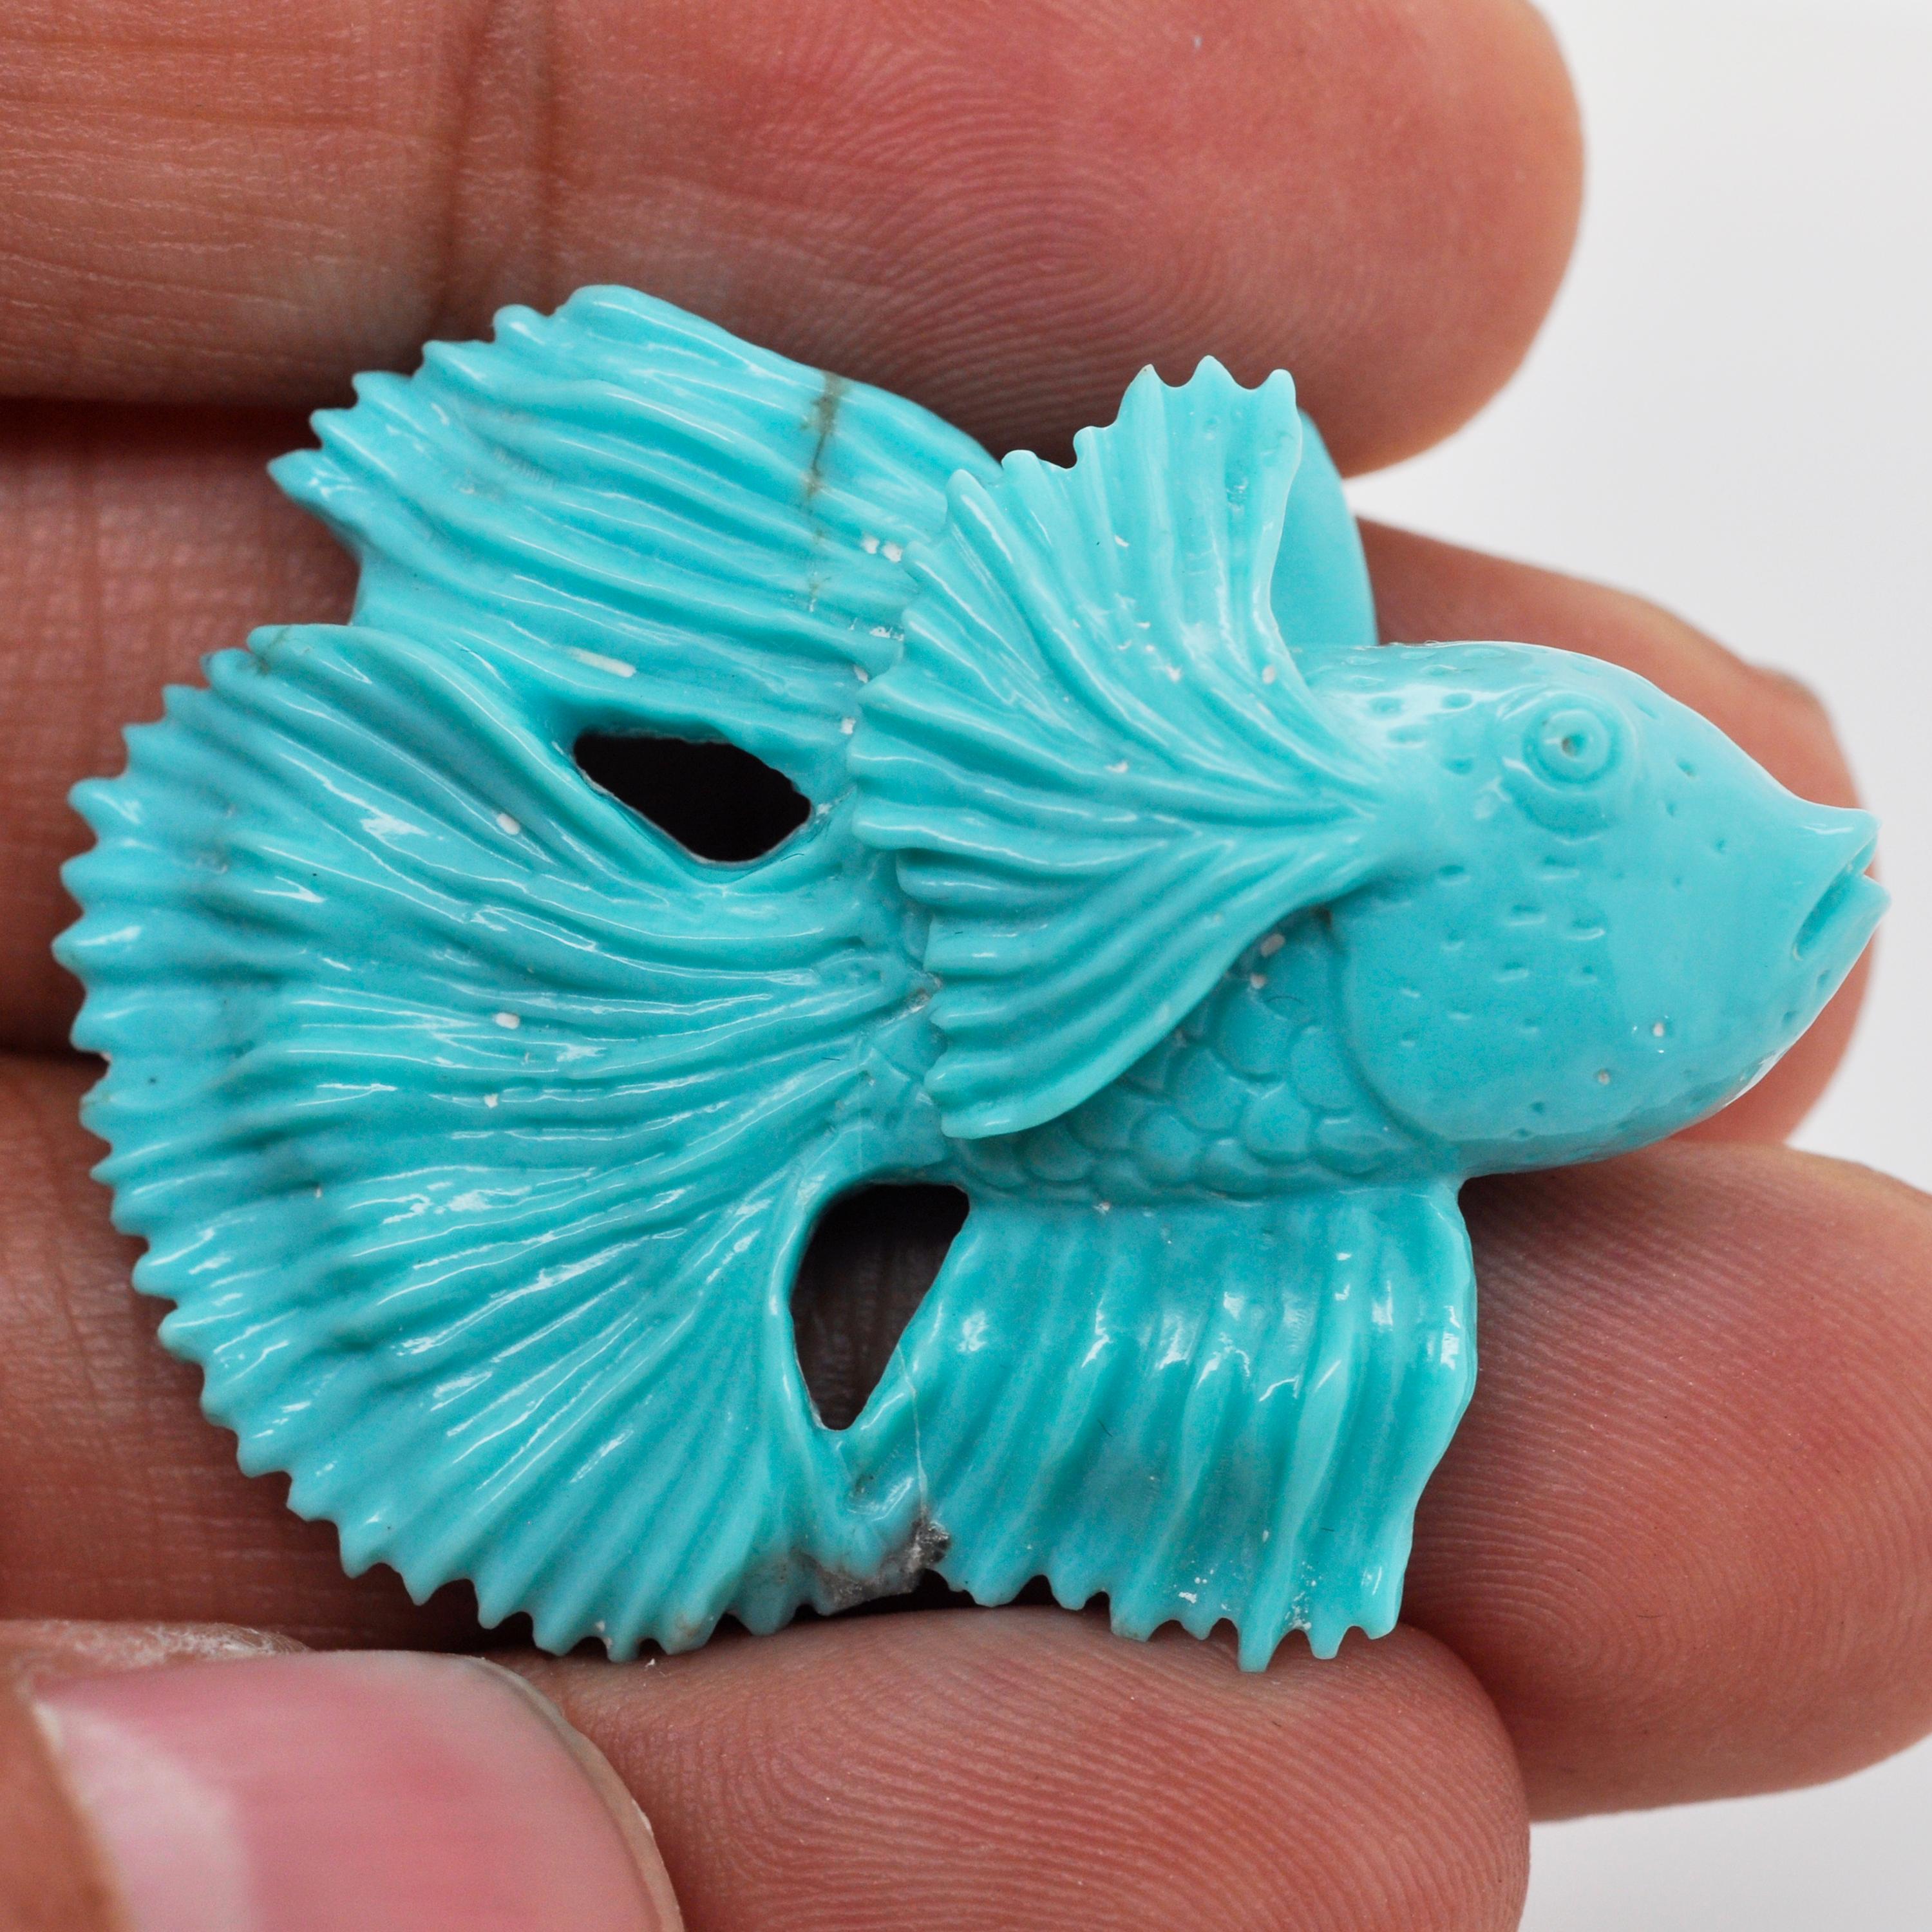 Our one-of-a-kind 42.23 cts hand-carved fish on natural Arizona Turquoise is a mesmerizing piece of art created by our expert lapidary artist in Jaipur. With exceptional skill and attention to detail, the lapidary artist has transformed a raw stone